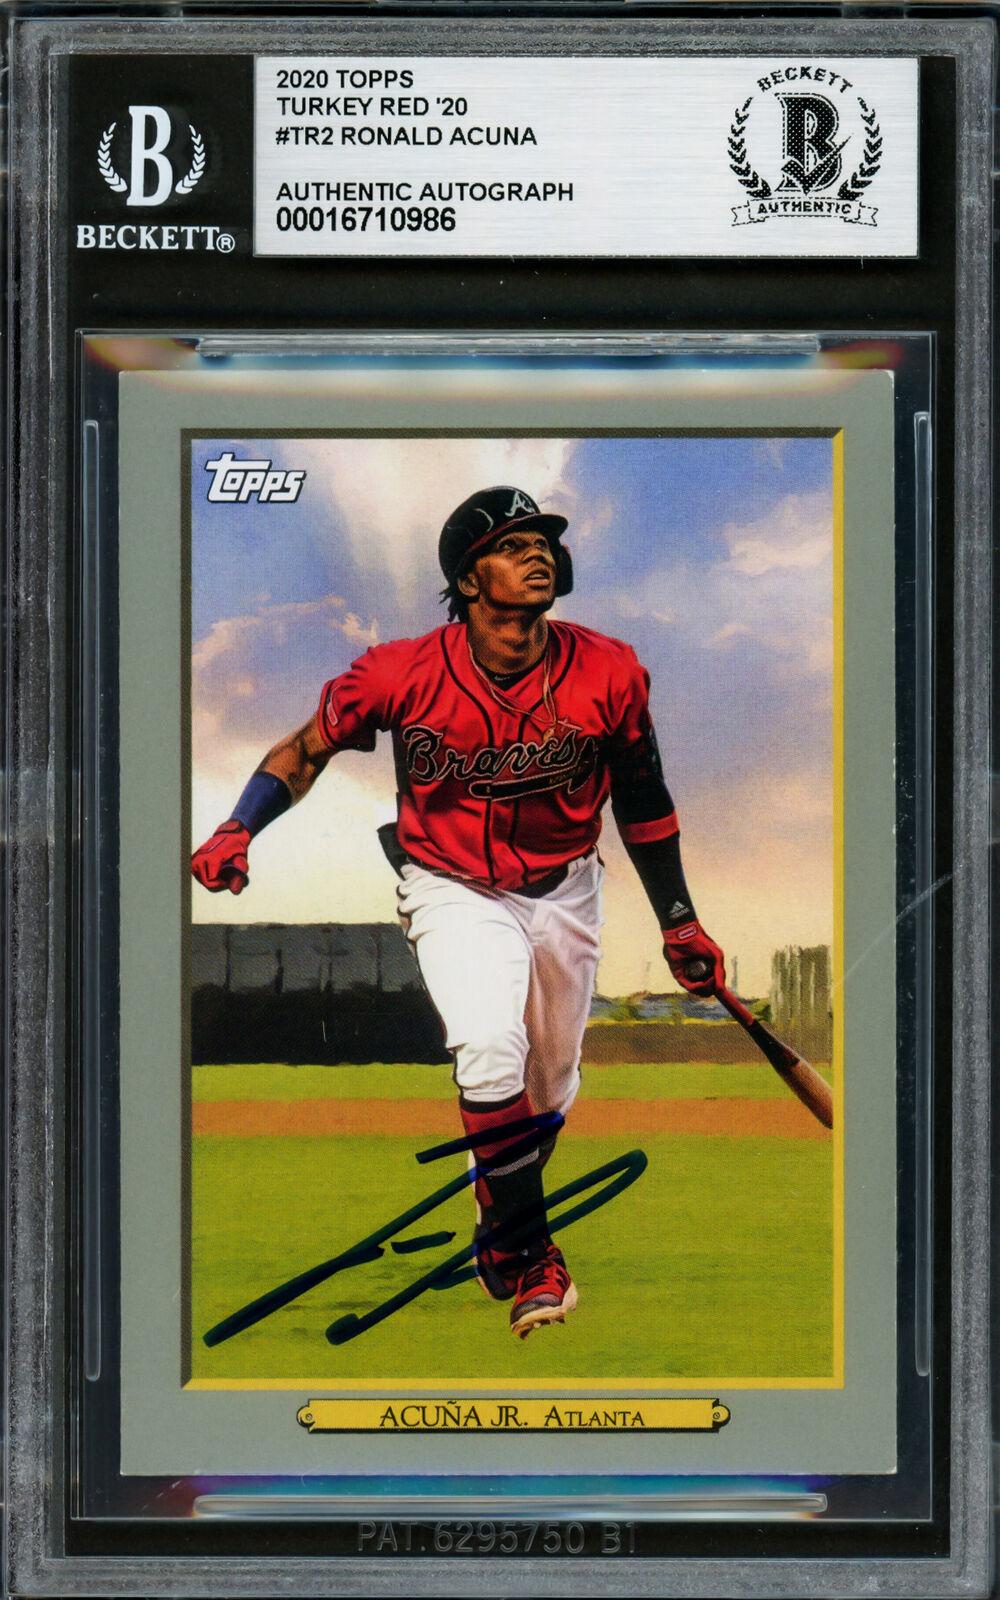 Ronald Acuna Jr. Autographed 2020 Topps Turkey Red Card Braves Beckett #16710986 Image 1